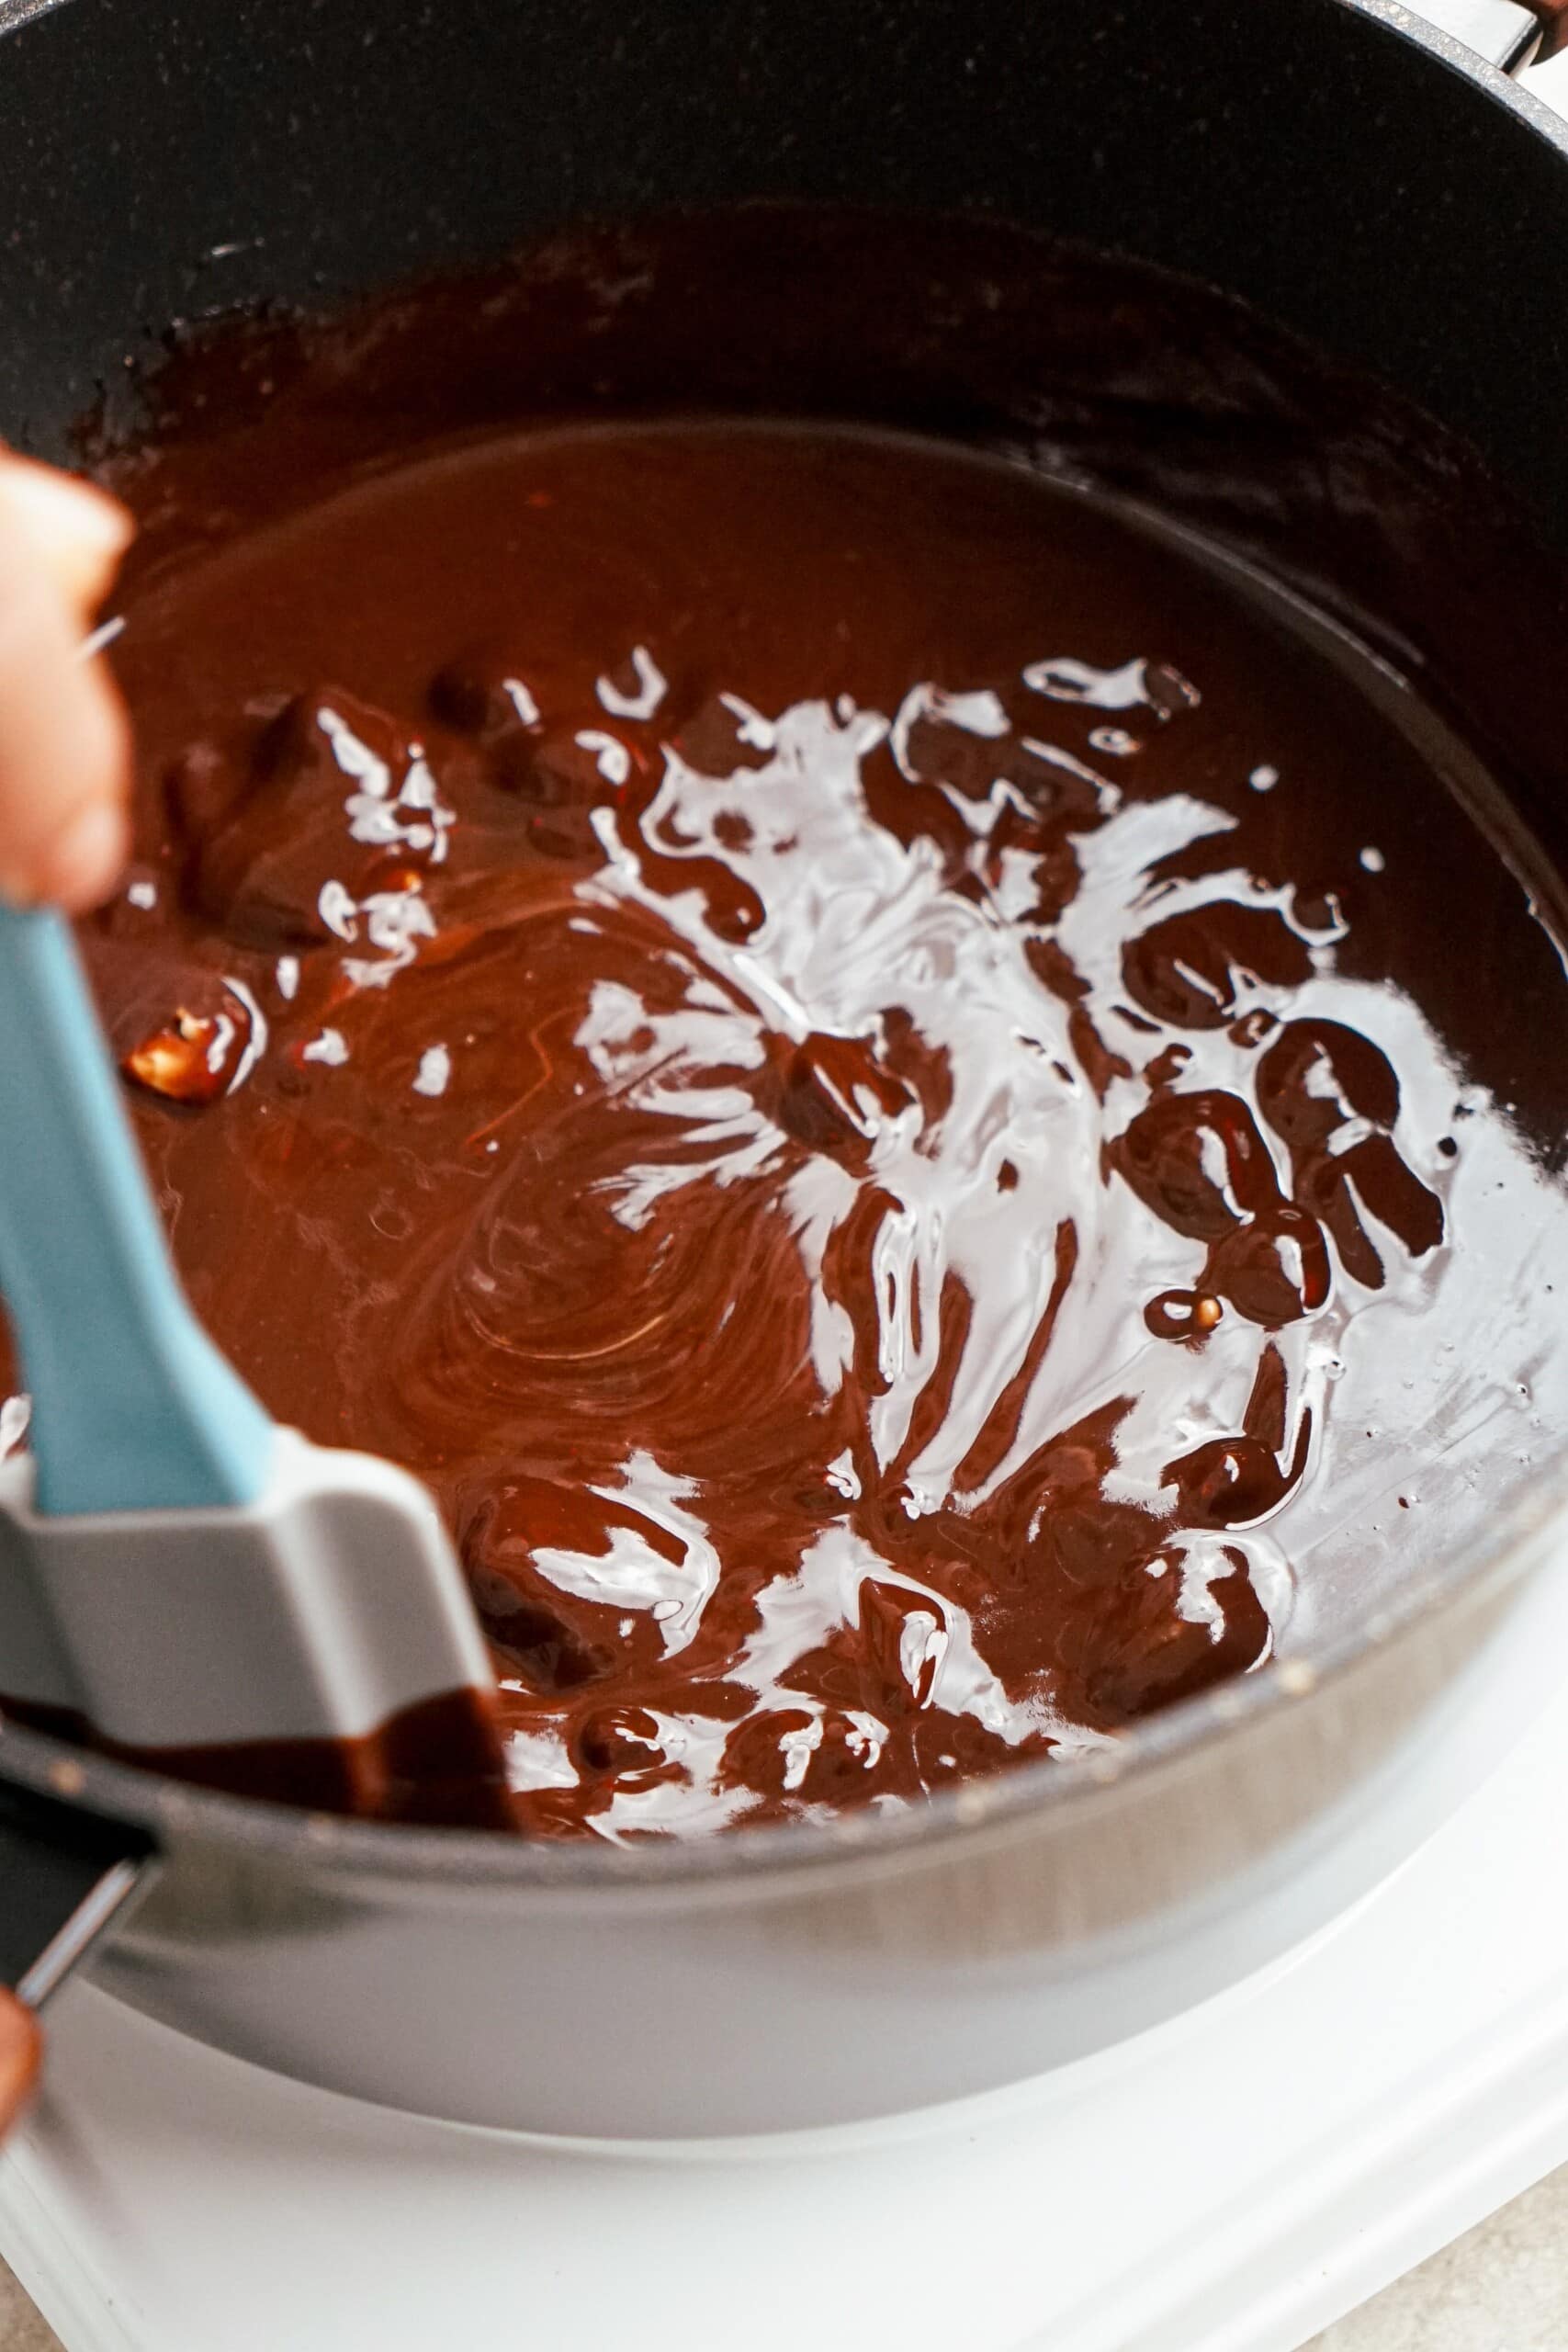 melted chocolate and butter and cocoa powder in a saucepan